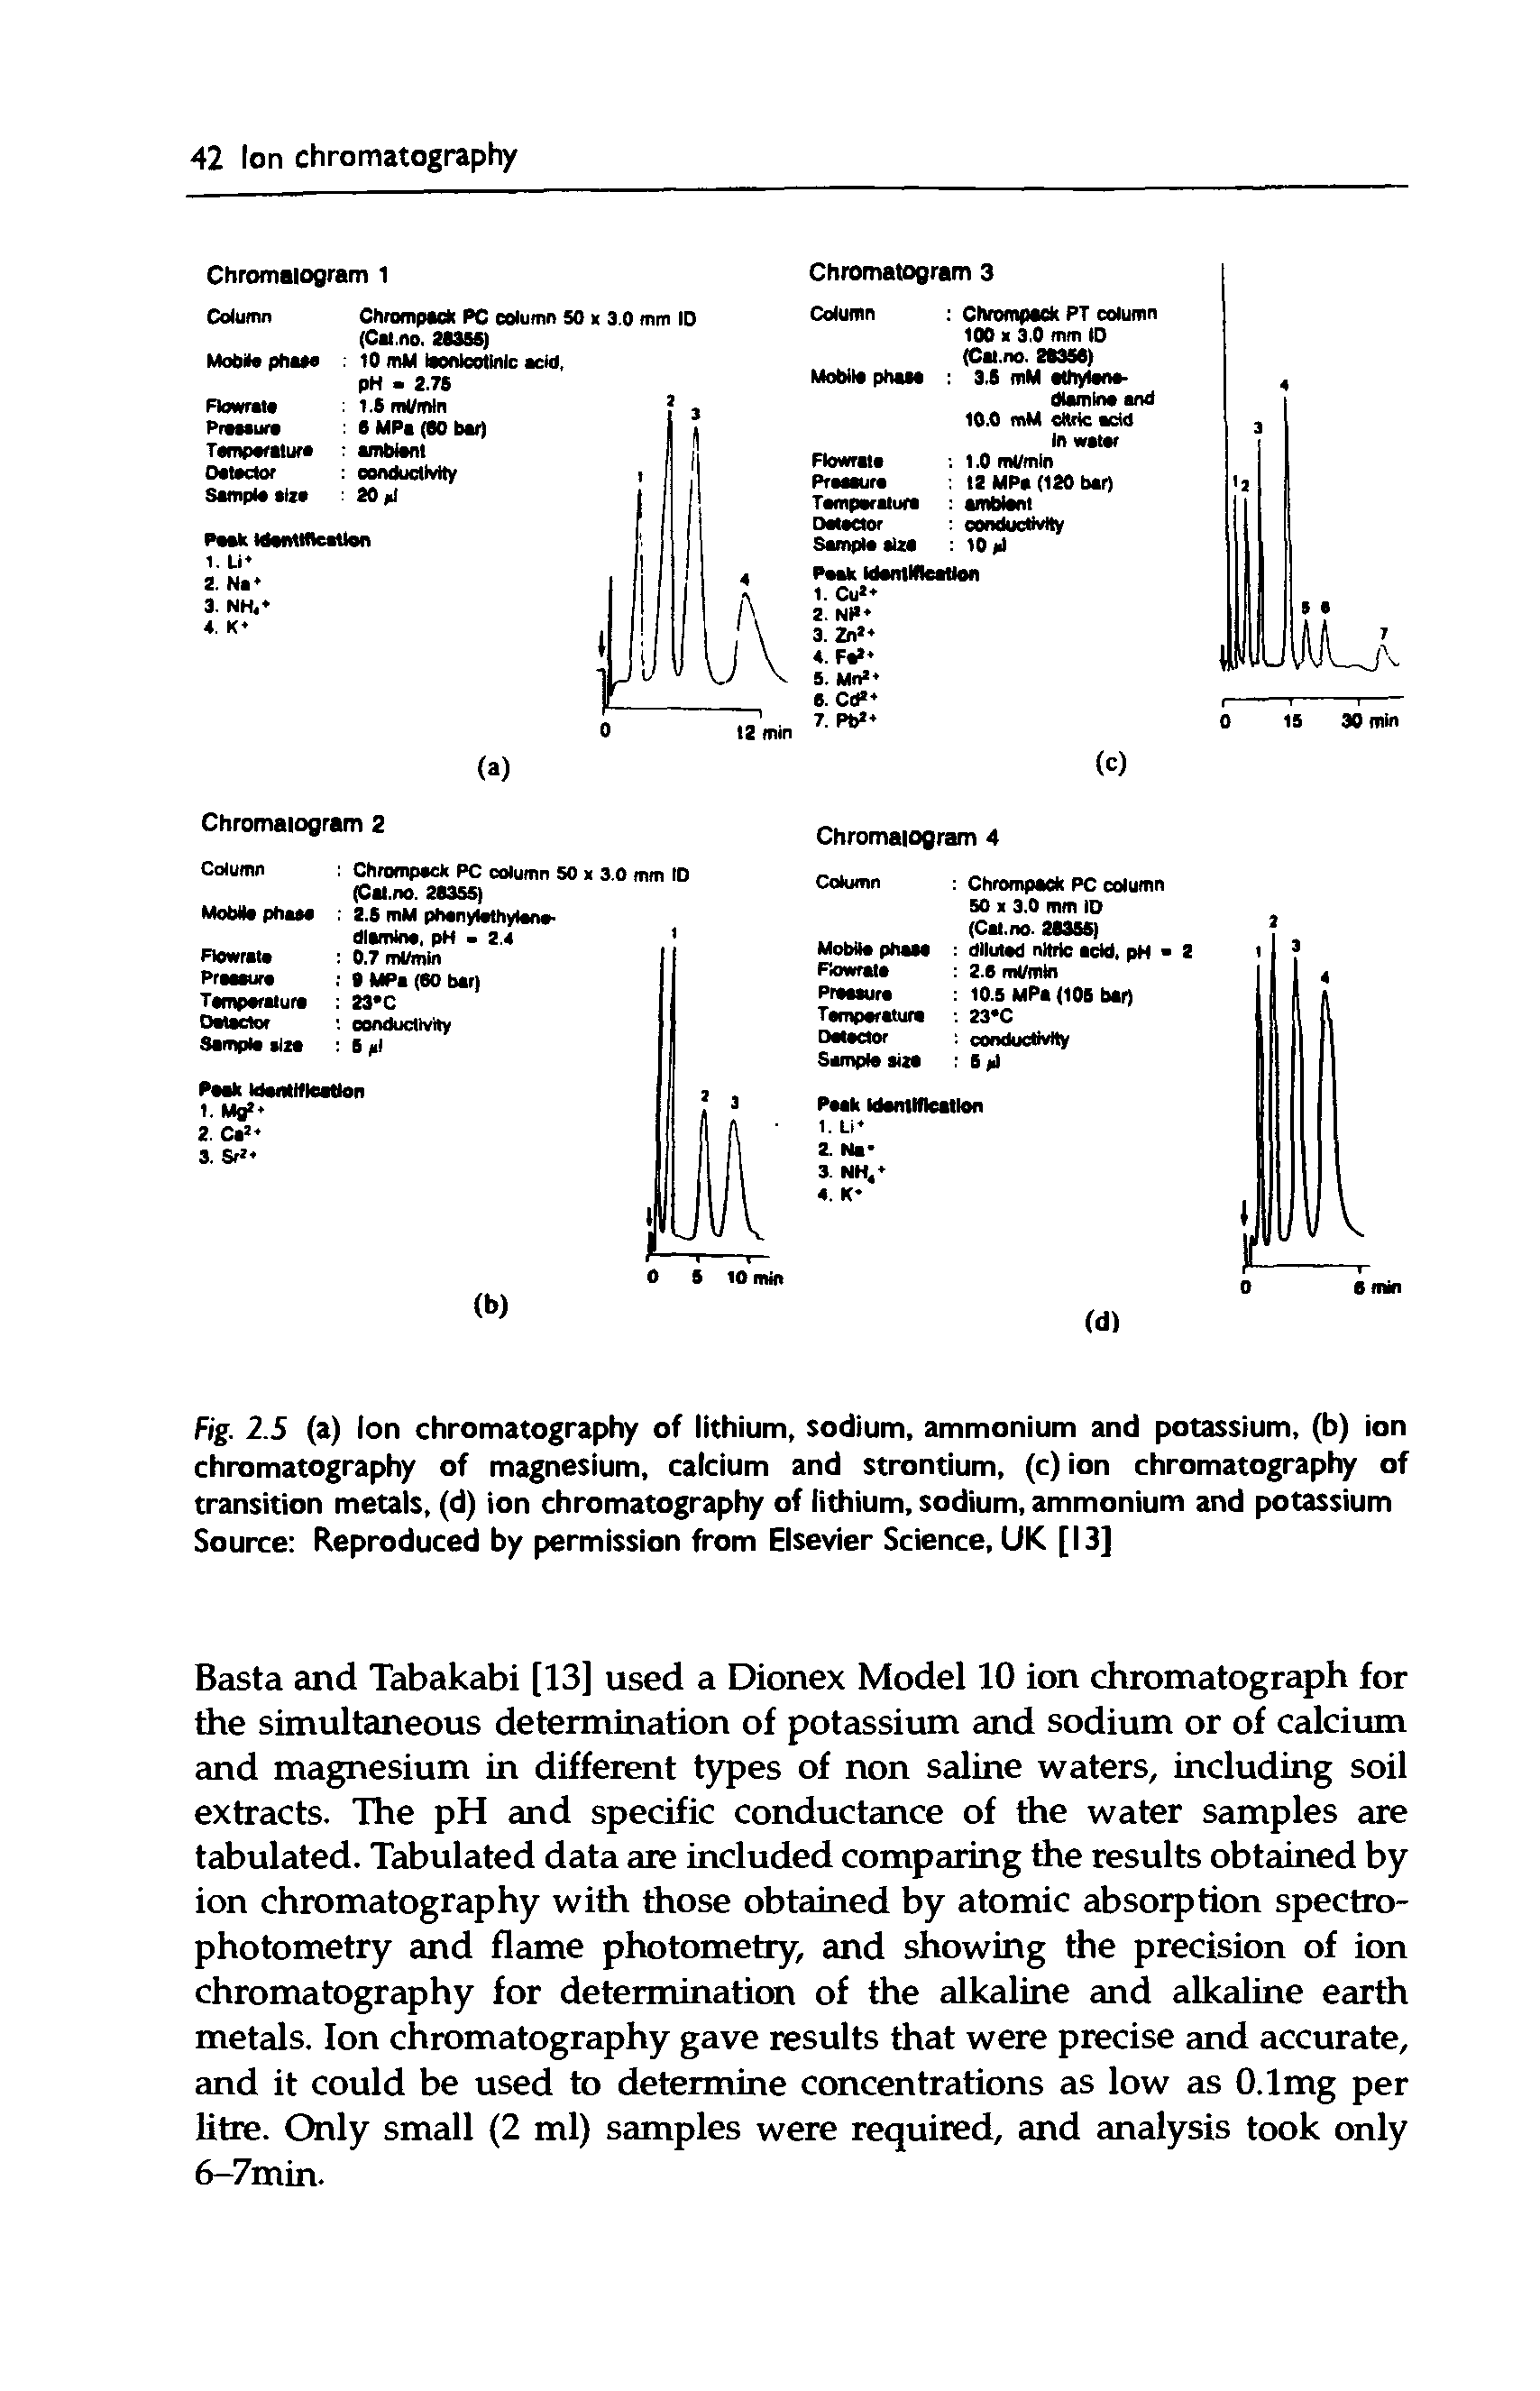 Fig. 2.S (a) Ion chromatography of lithium, sodium, ammonium and potassium, (b) ion chromatography of magnesium, calcium and strontium, (c)ion chromatography of transition metals, (d) ion chromatography of lithium, sodium, ammonium and potassium Source Reproduced by permission from Elsevier Science, UK [13]...